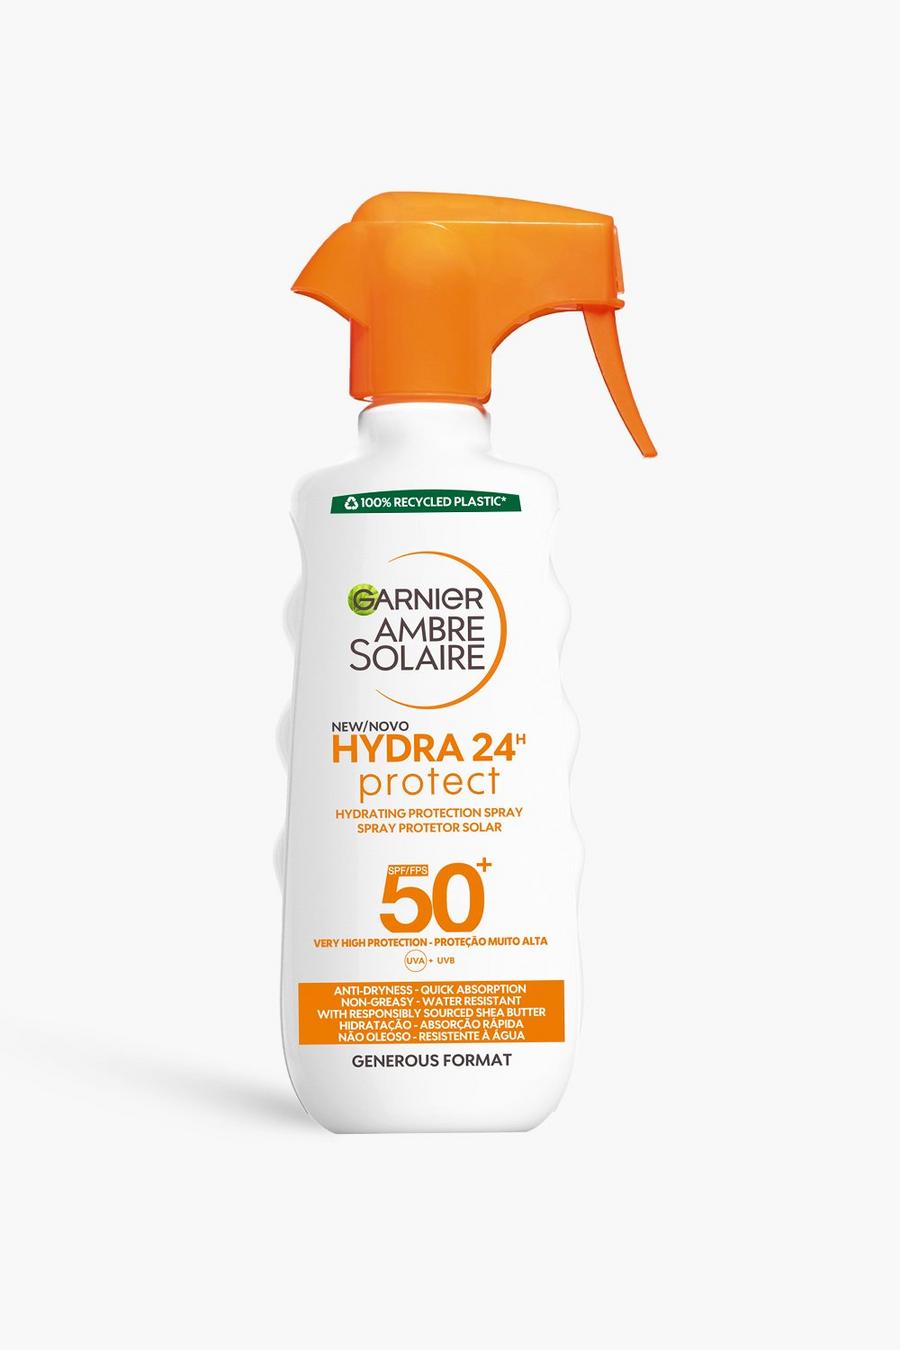 White blanco Garnier Ambre Solaire Hydra 24 Hour Protect Hydrating Protection Spray SPF50, UVA & UVB Protection, 300ml (SAVE 31%)